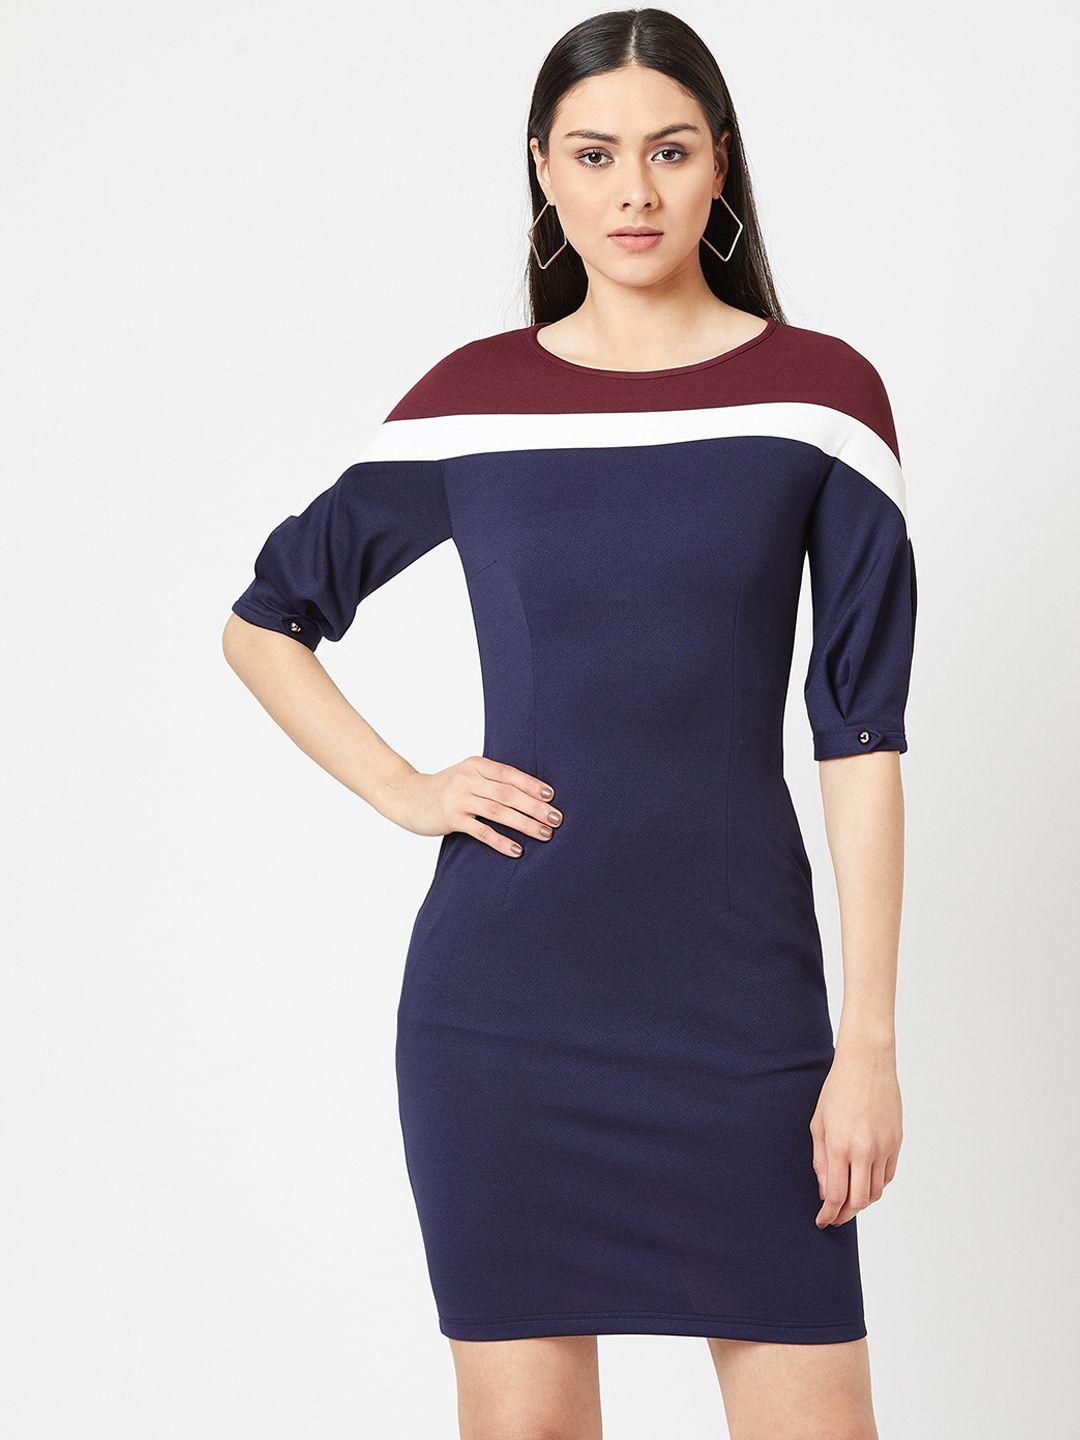 miss chase navy blue & red striped crepe bodycon dress